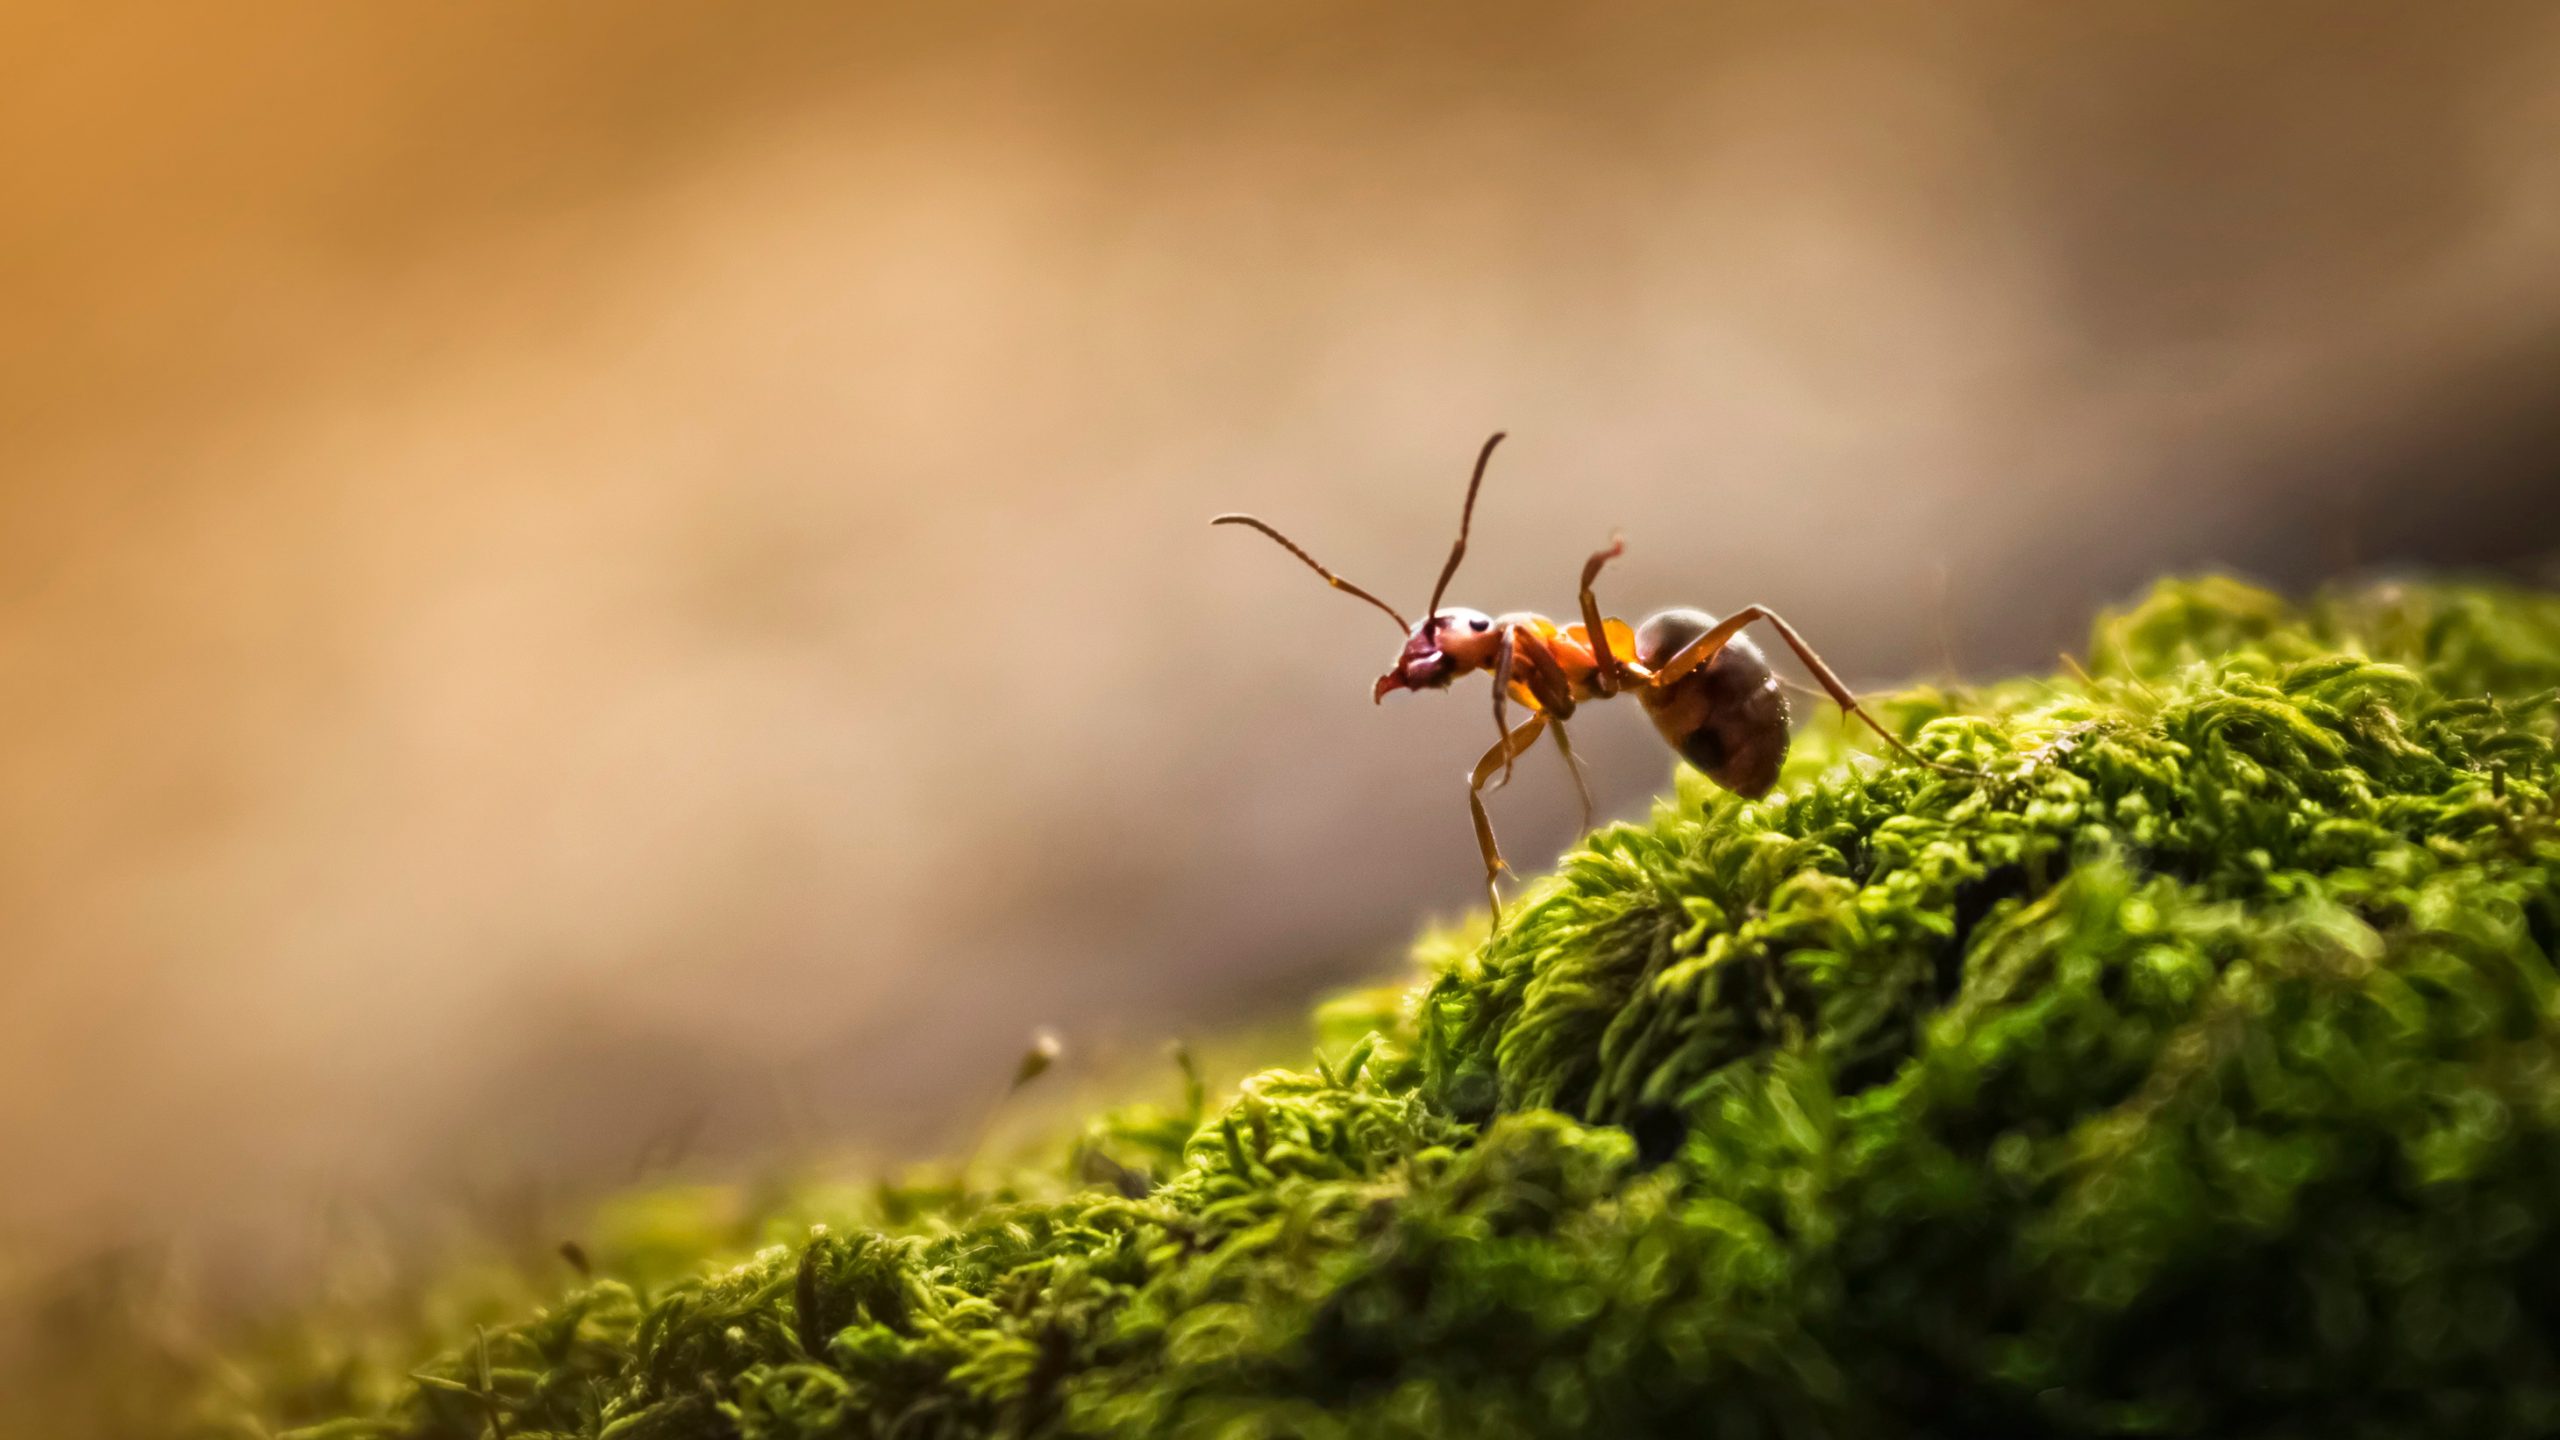 faq - How long does it take to get rid of carpenter ants? - birch